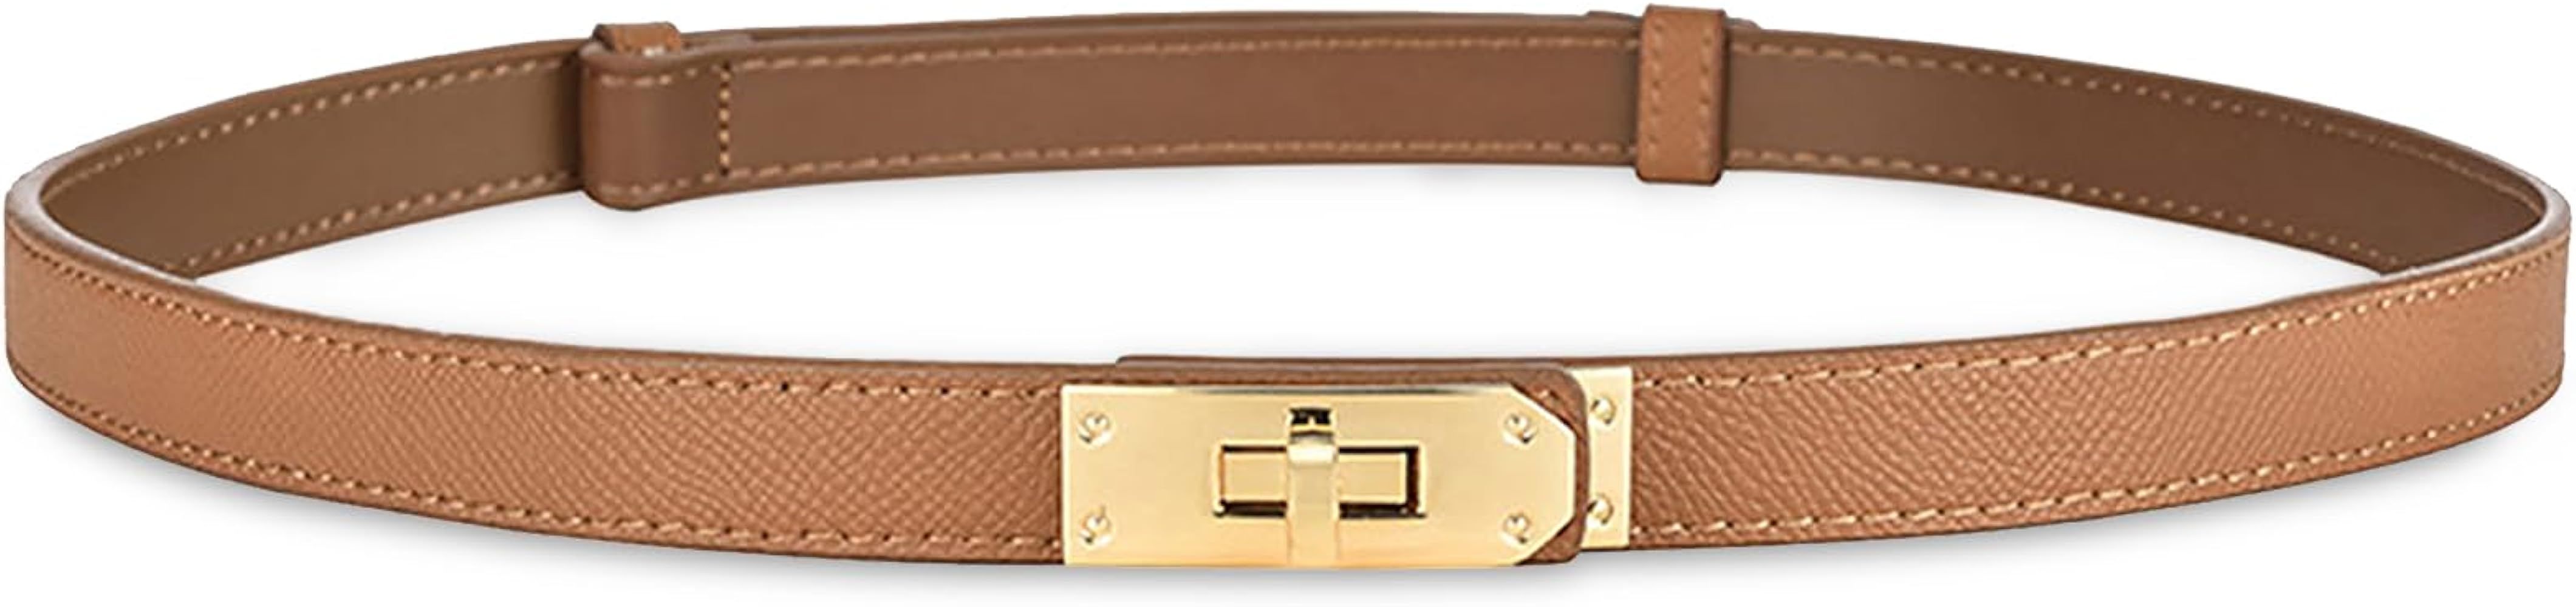 Women's Skinny Leather Belt with Adjustable Silver Turn-Lock Buckle - Ideal for Dresses, Jeans, a... | Amazon (US)